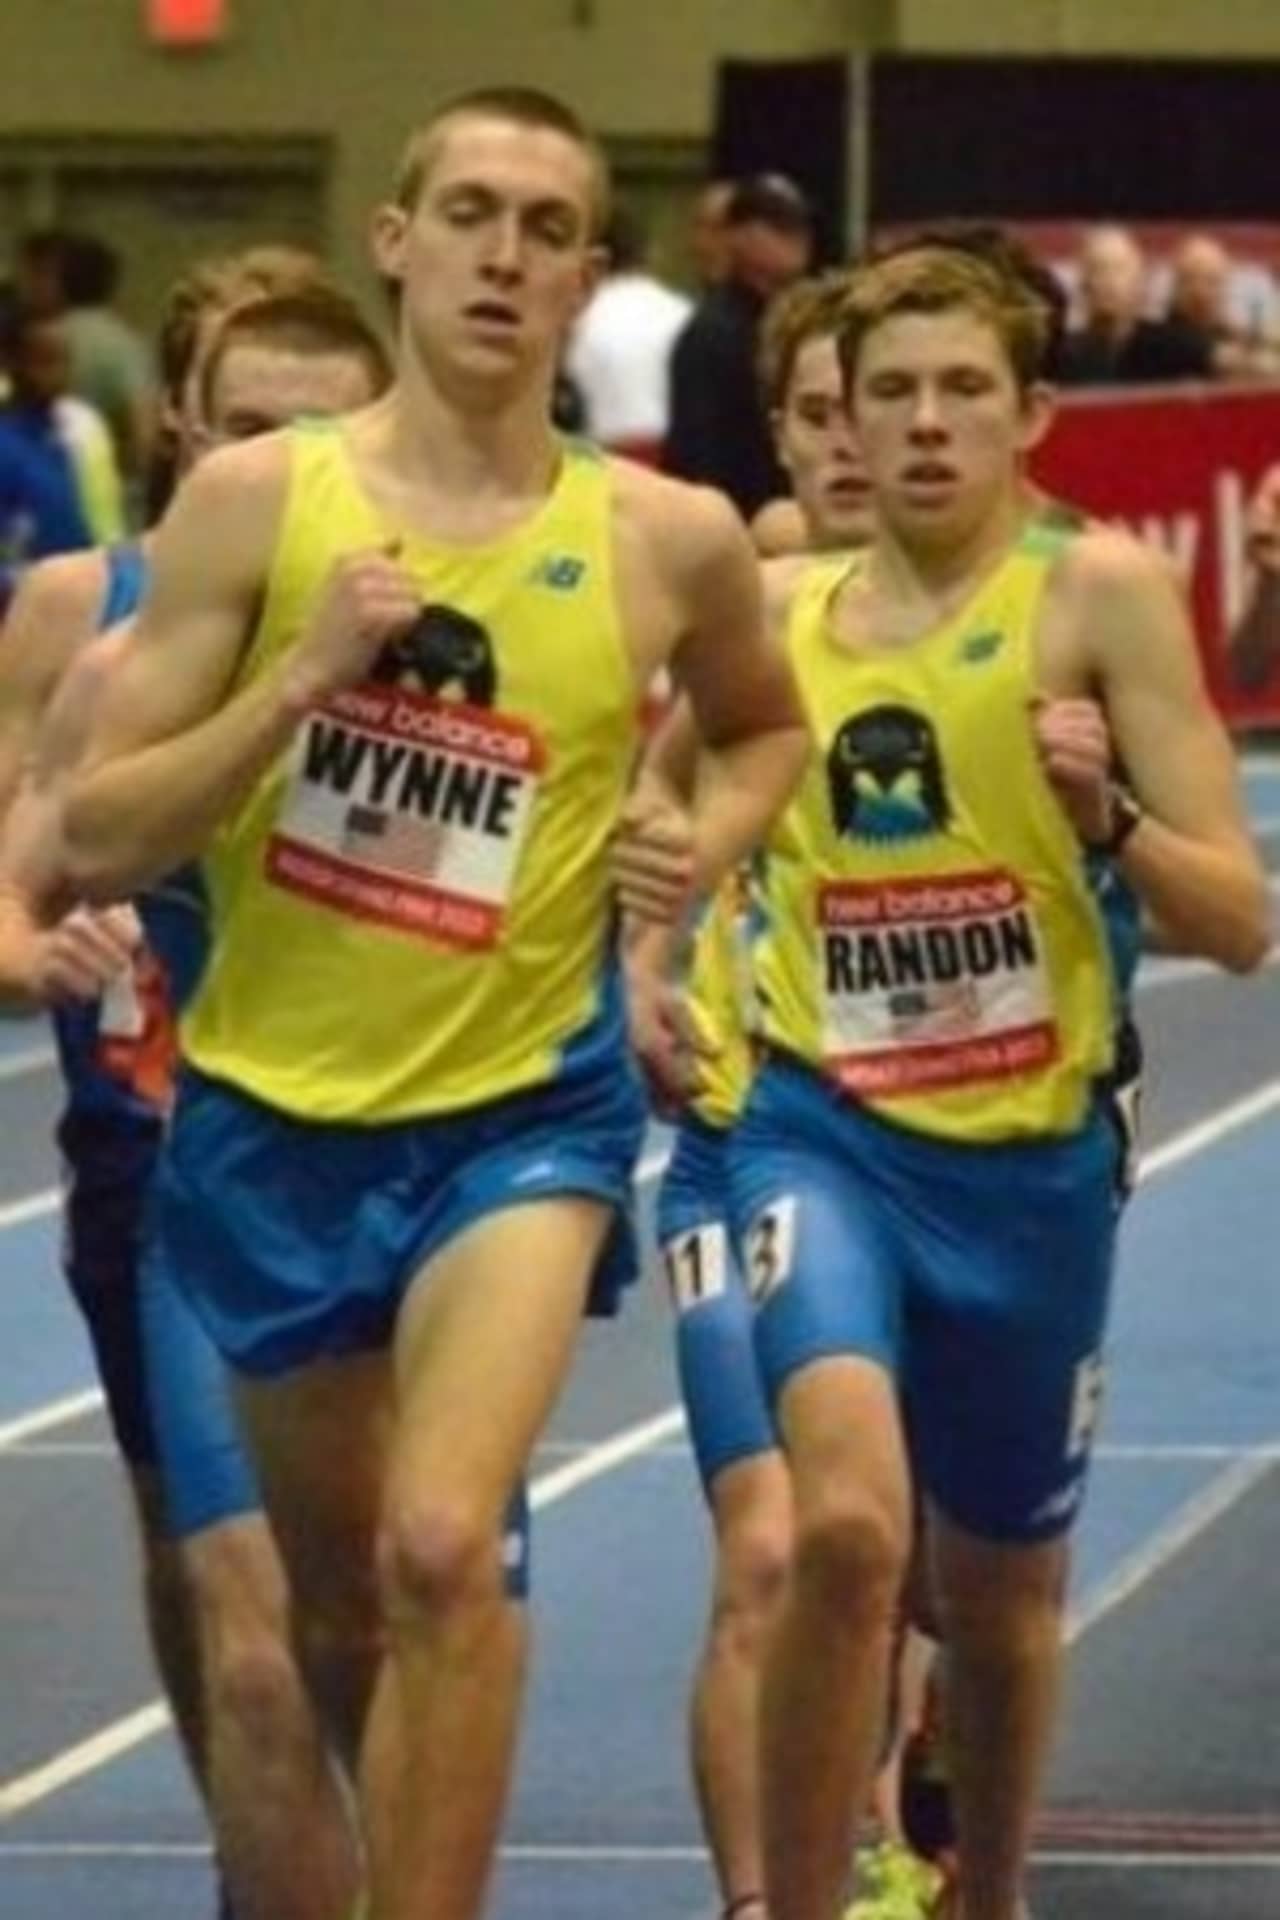 New Canaan's James Randon, right, finished second in the 2-mile run and fourth in the mile at the New Balance Outdoor Nationals over the weekend.